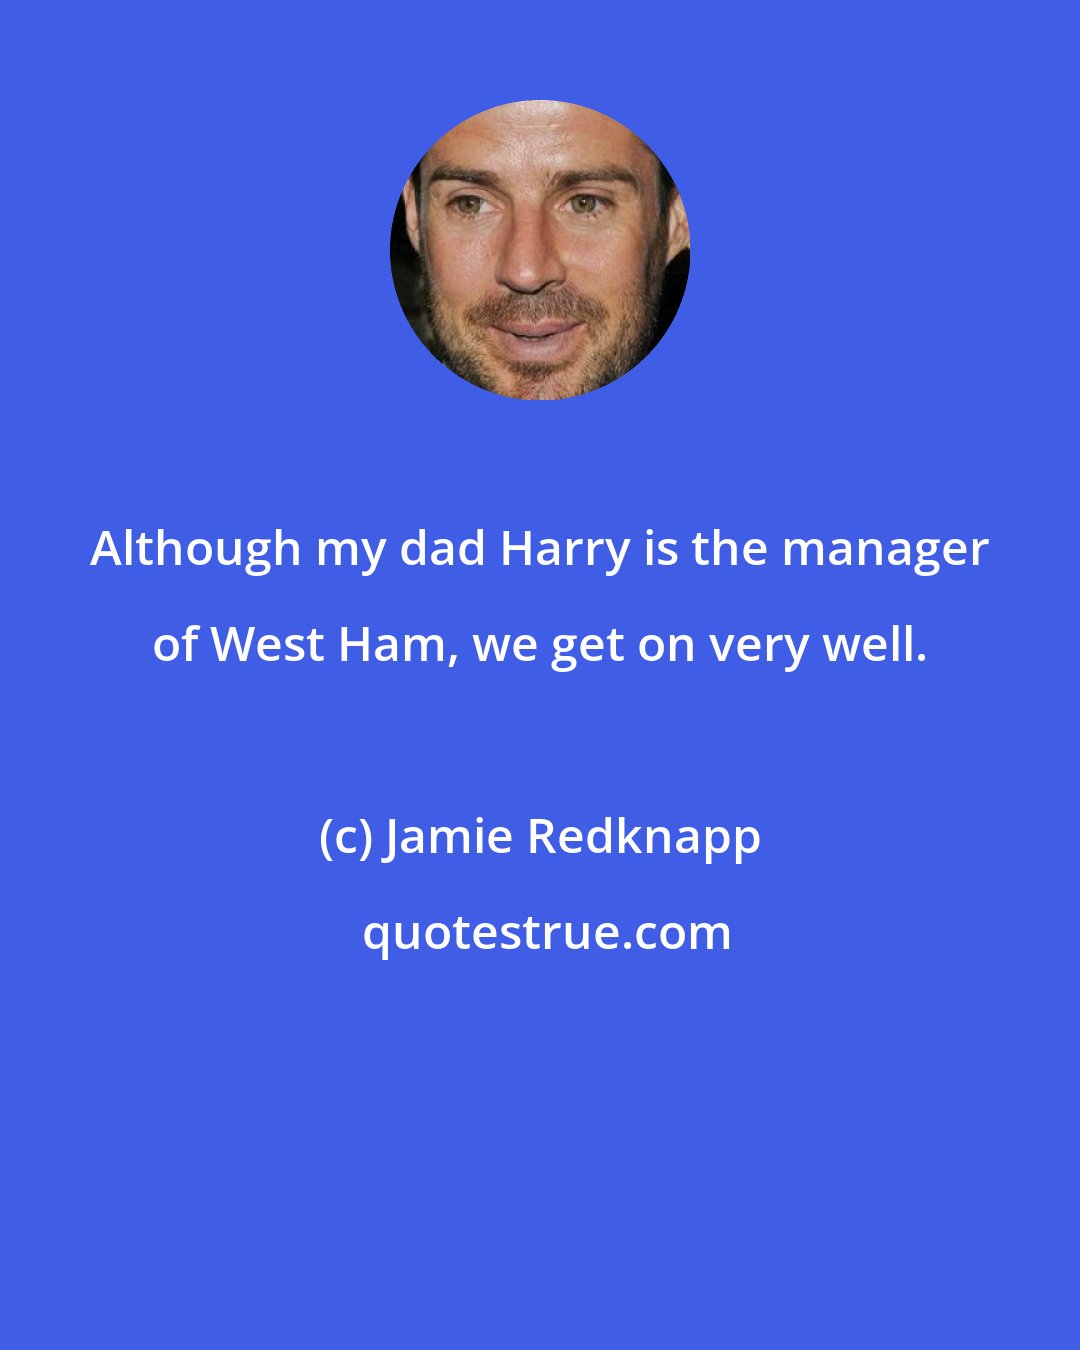 Jamie Redknapp: Although my dad Harry is the manager of West Ham, we get on very well.